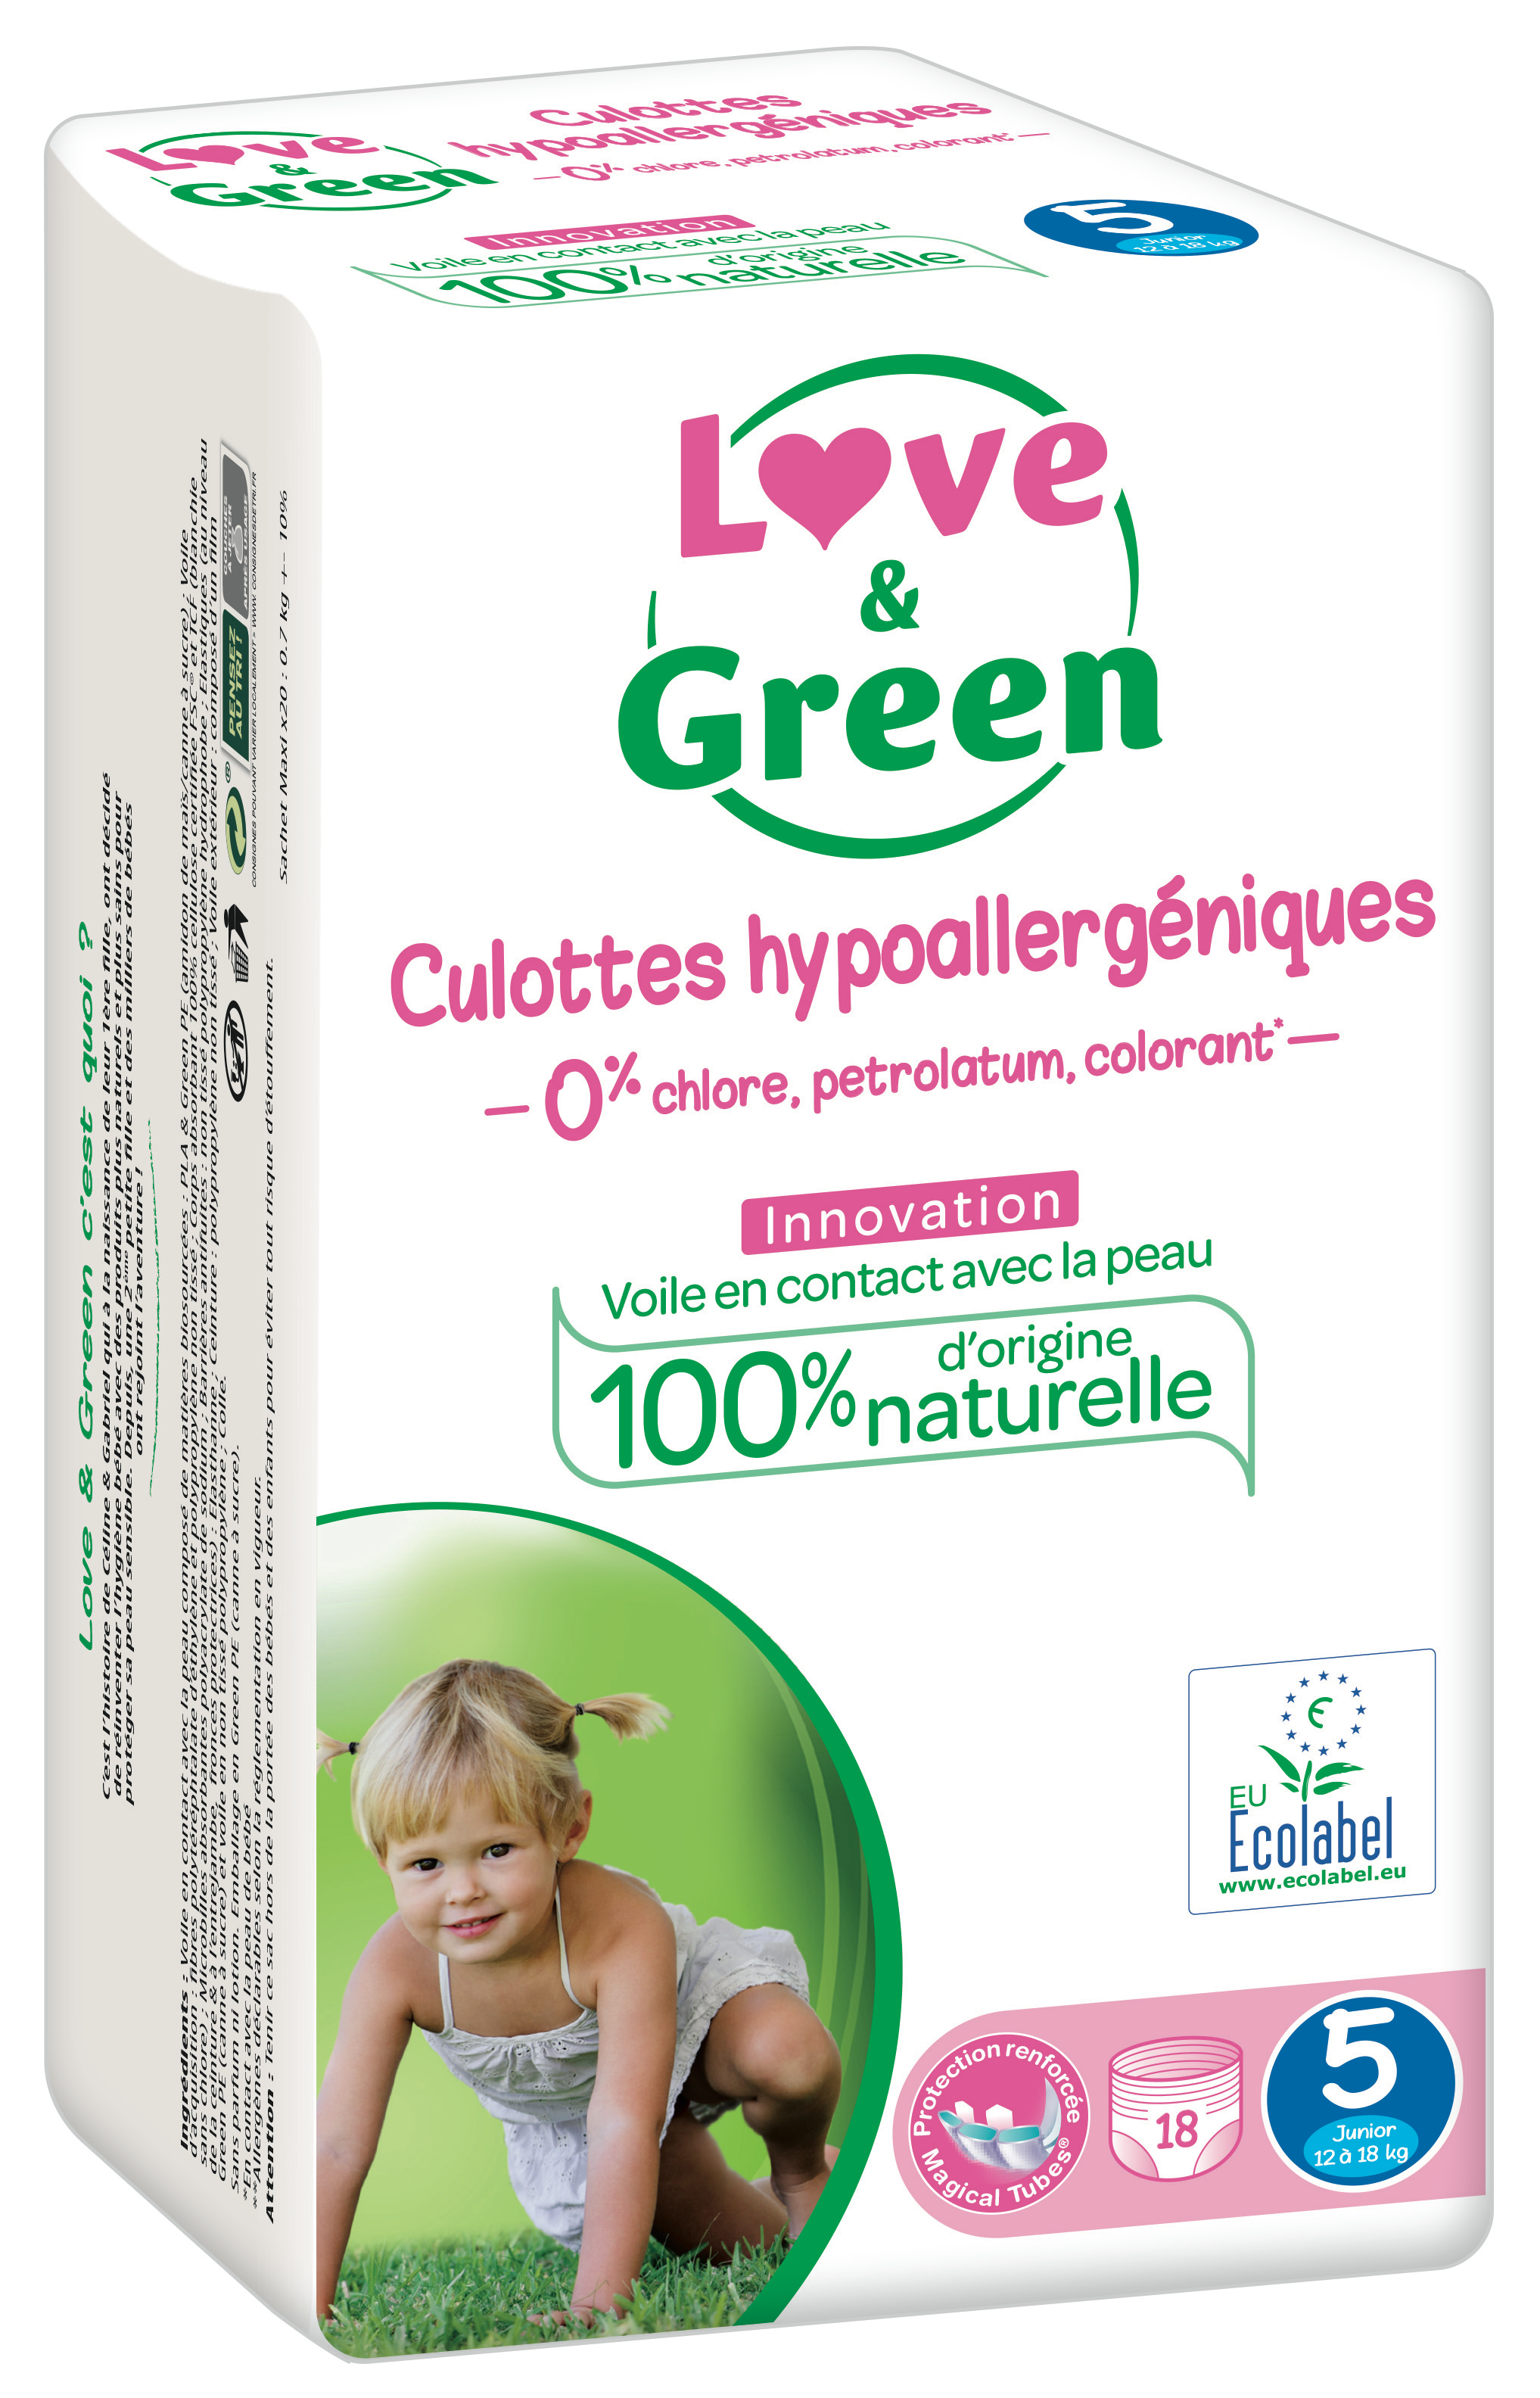 LOVE & GREEN Culottes hypoallergeniques taille 5 18 culottes pas